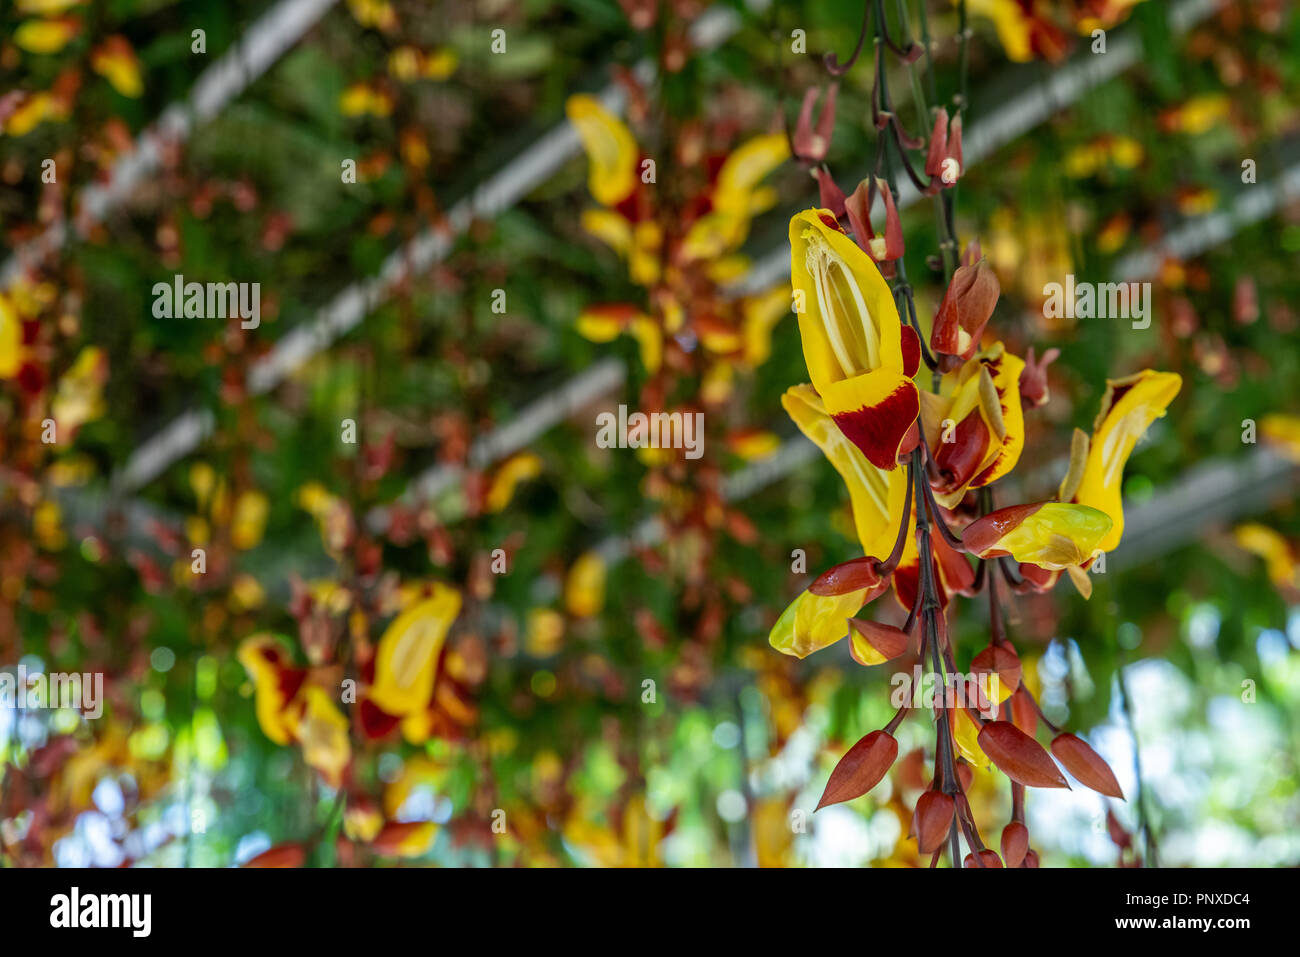 Yellow colorOrchidaceae hanging in the air Stock Photo